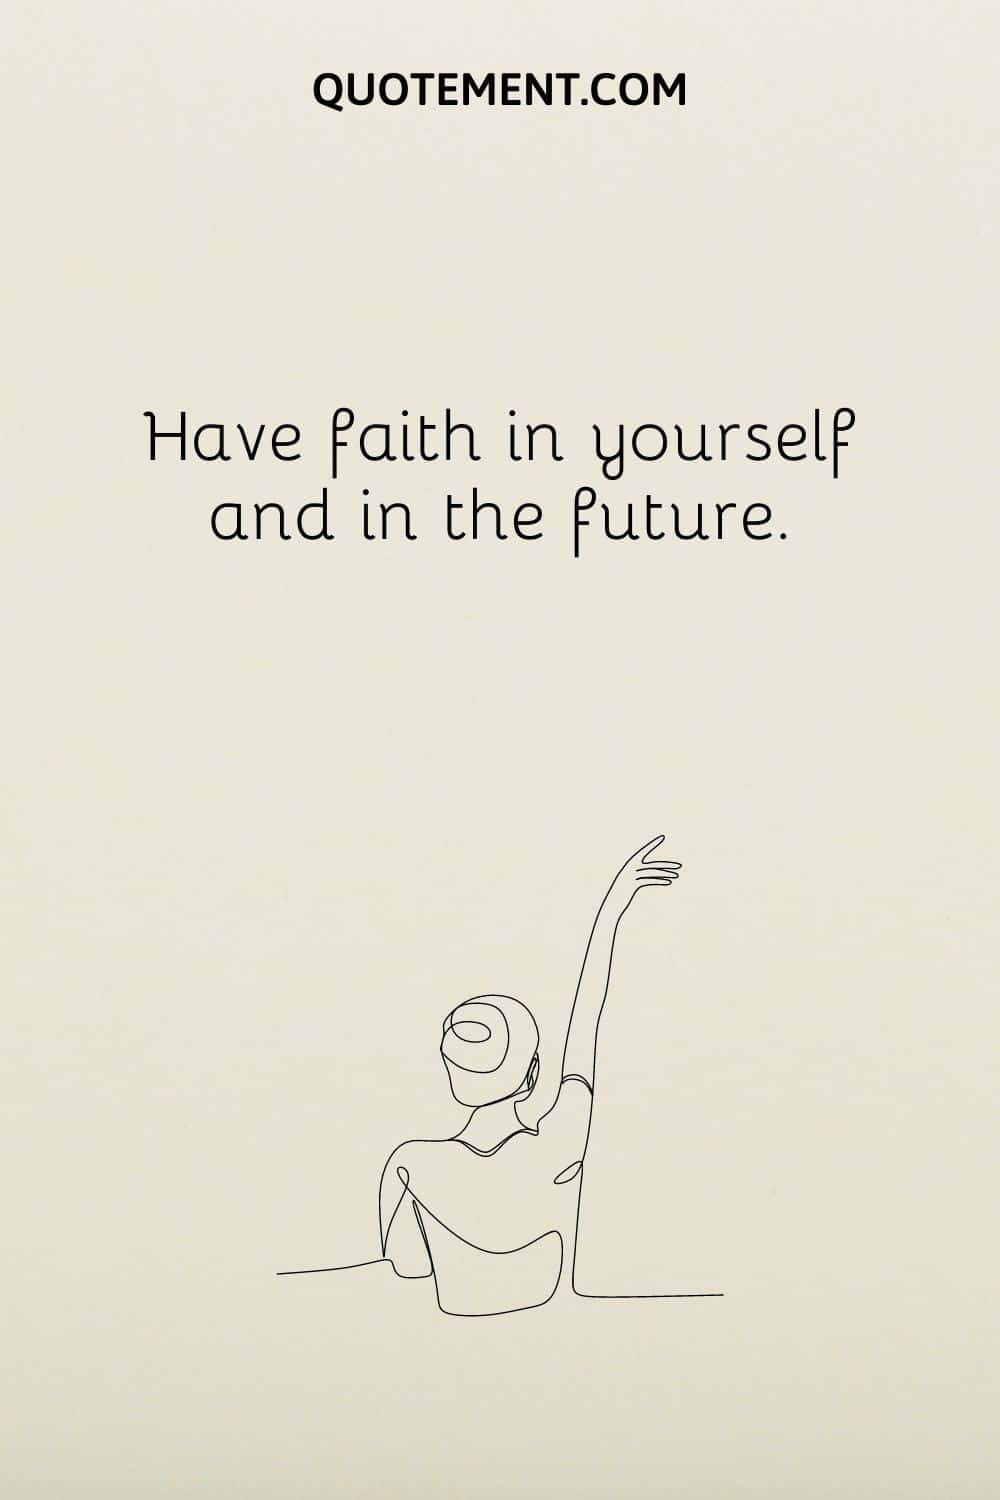 Have faith in yourself and in the future.